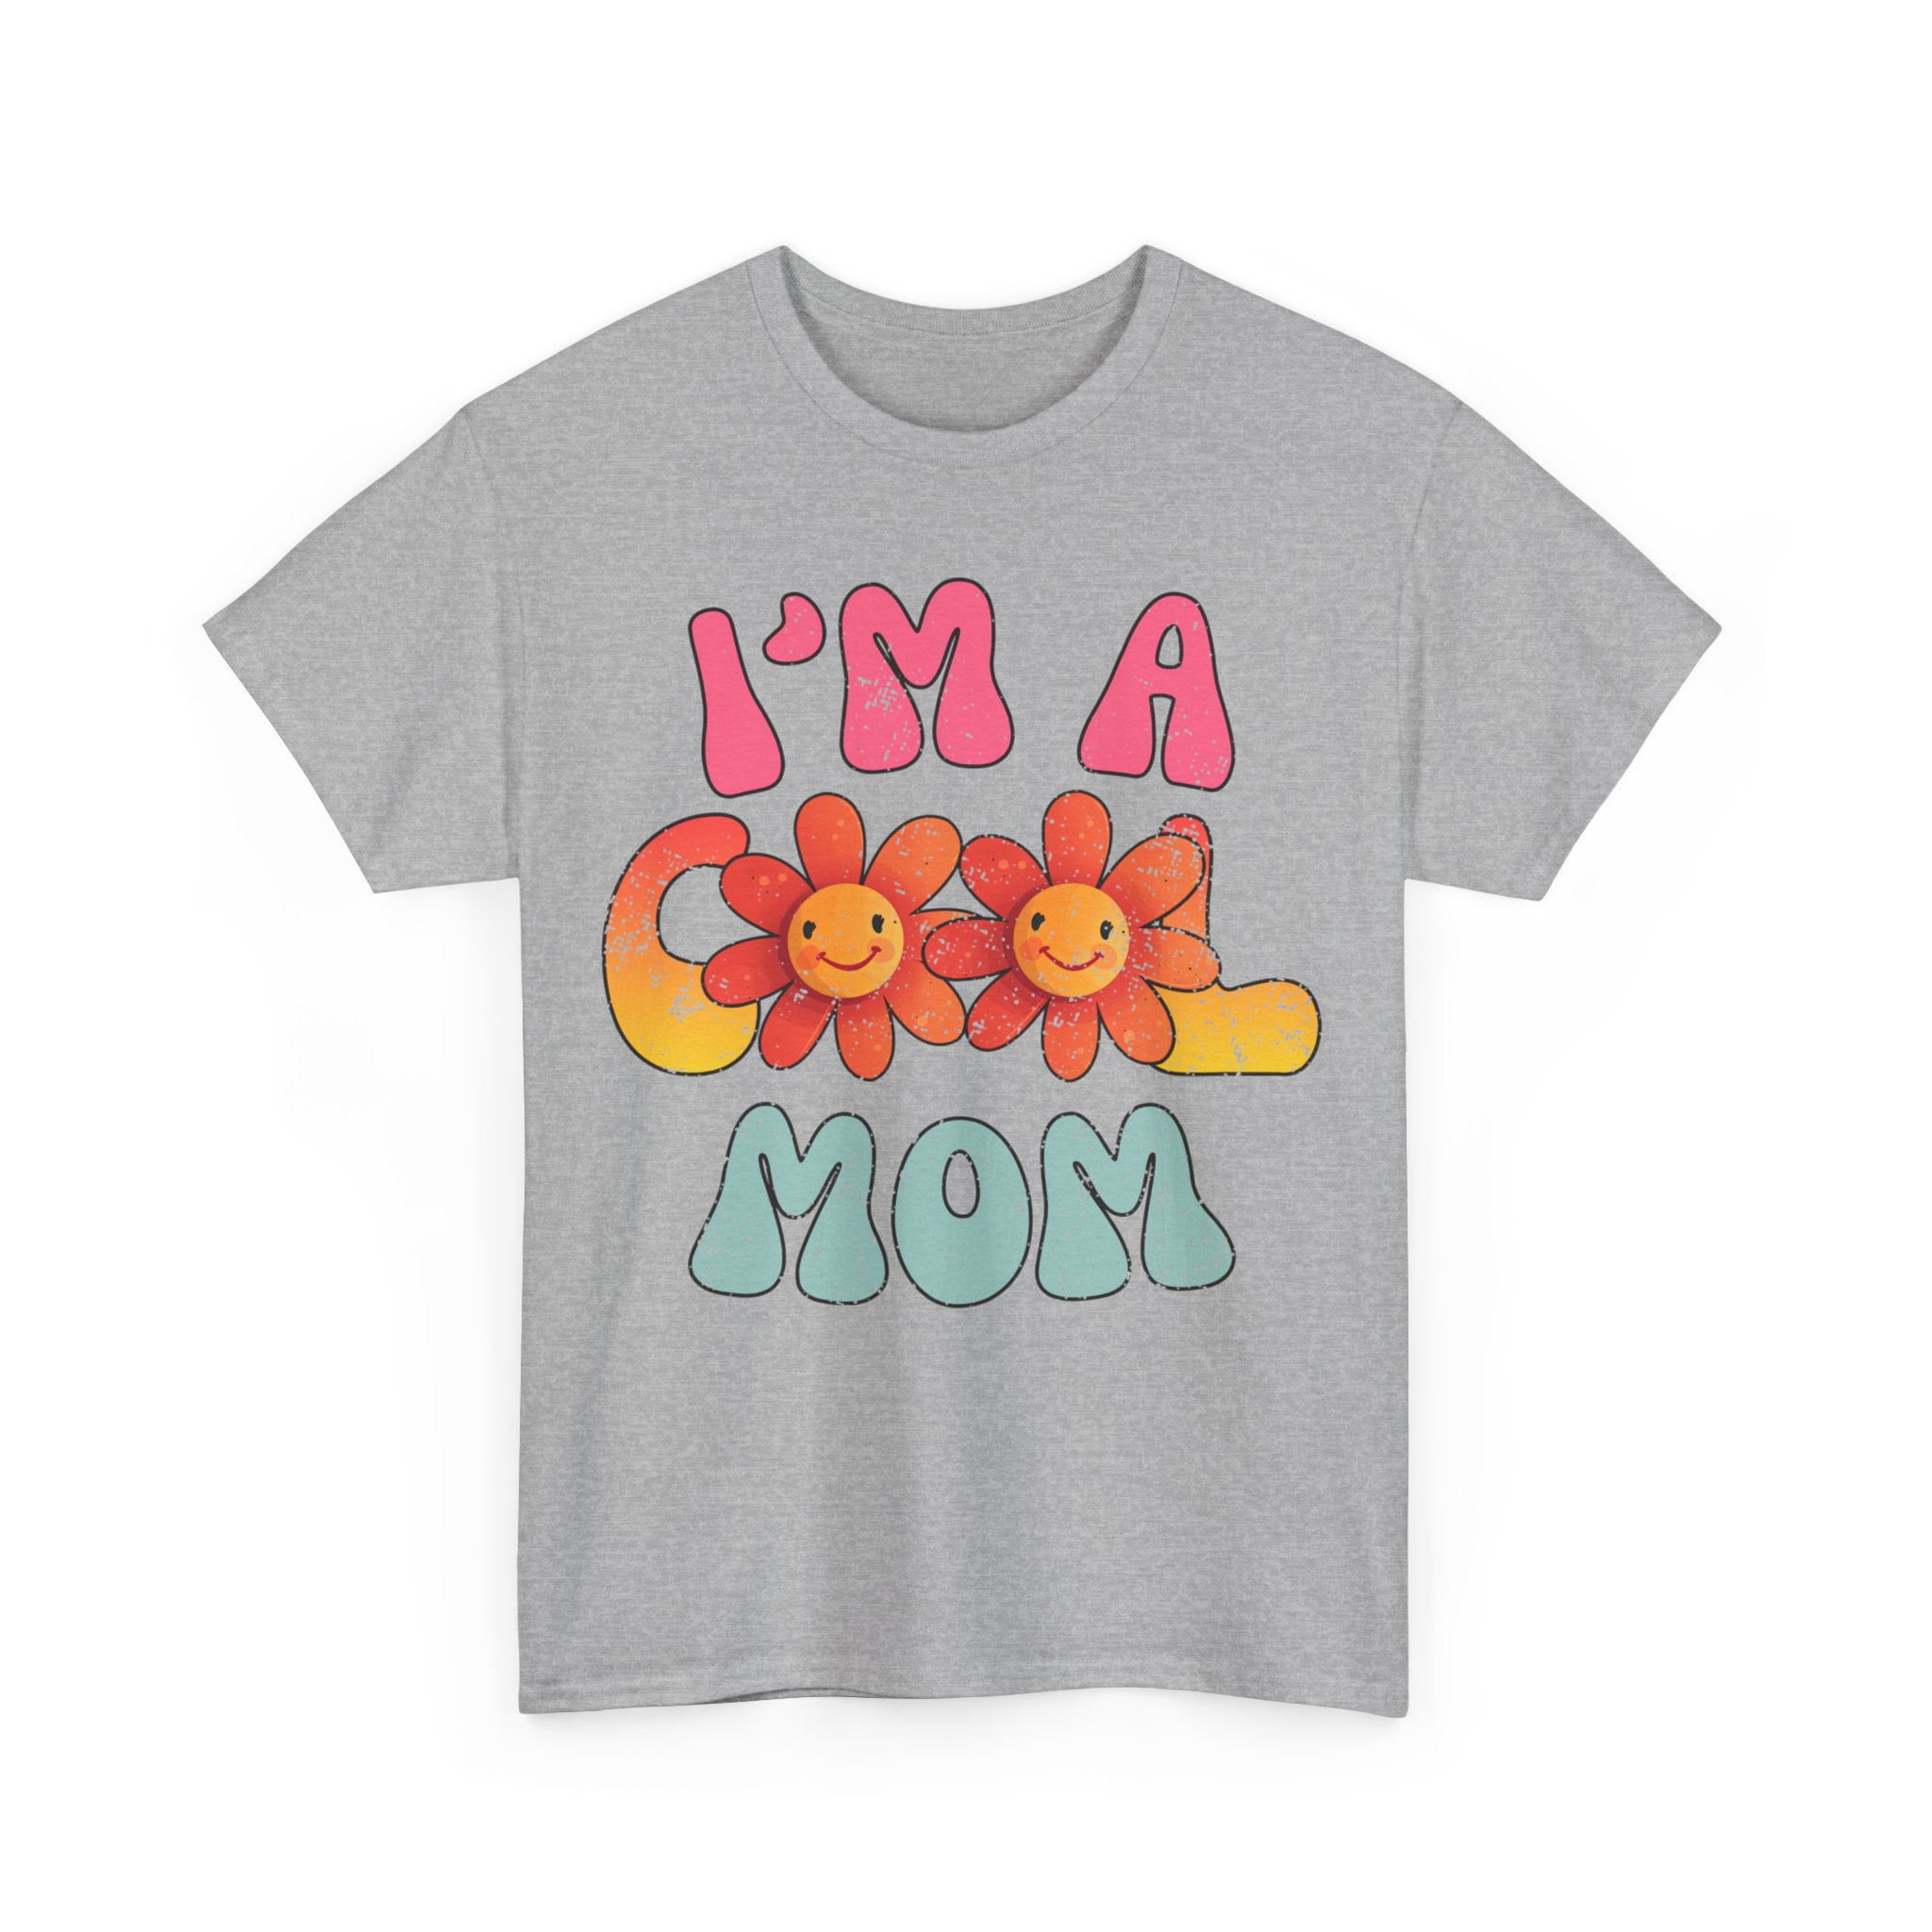 I'm A Cool Mom Shirt, Mother's Day Shirt, Mother's Day Gift ID-0420-GUXX